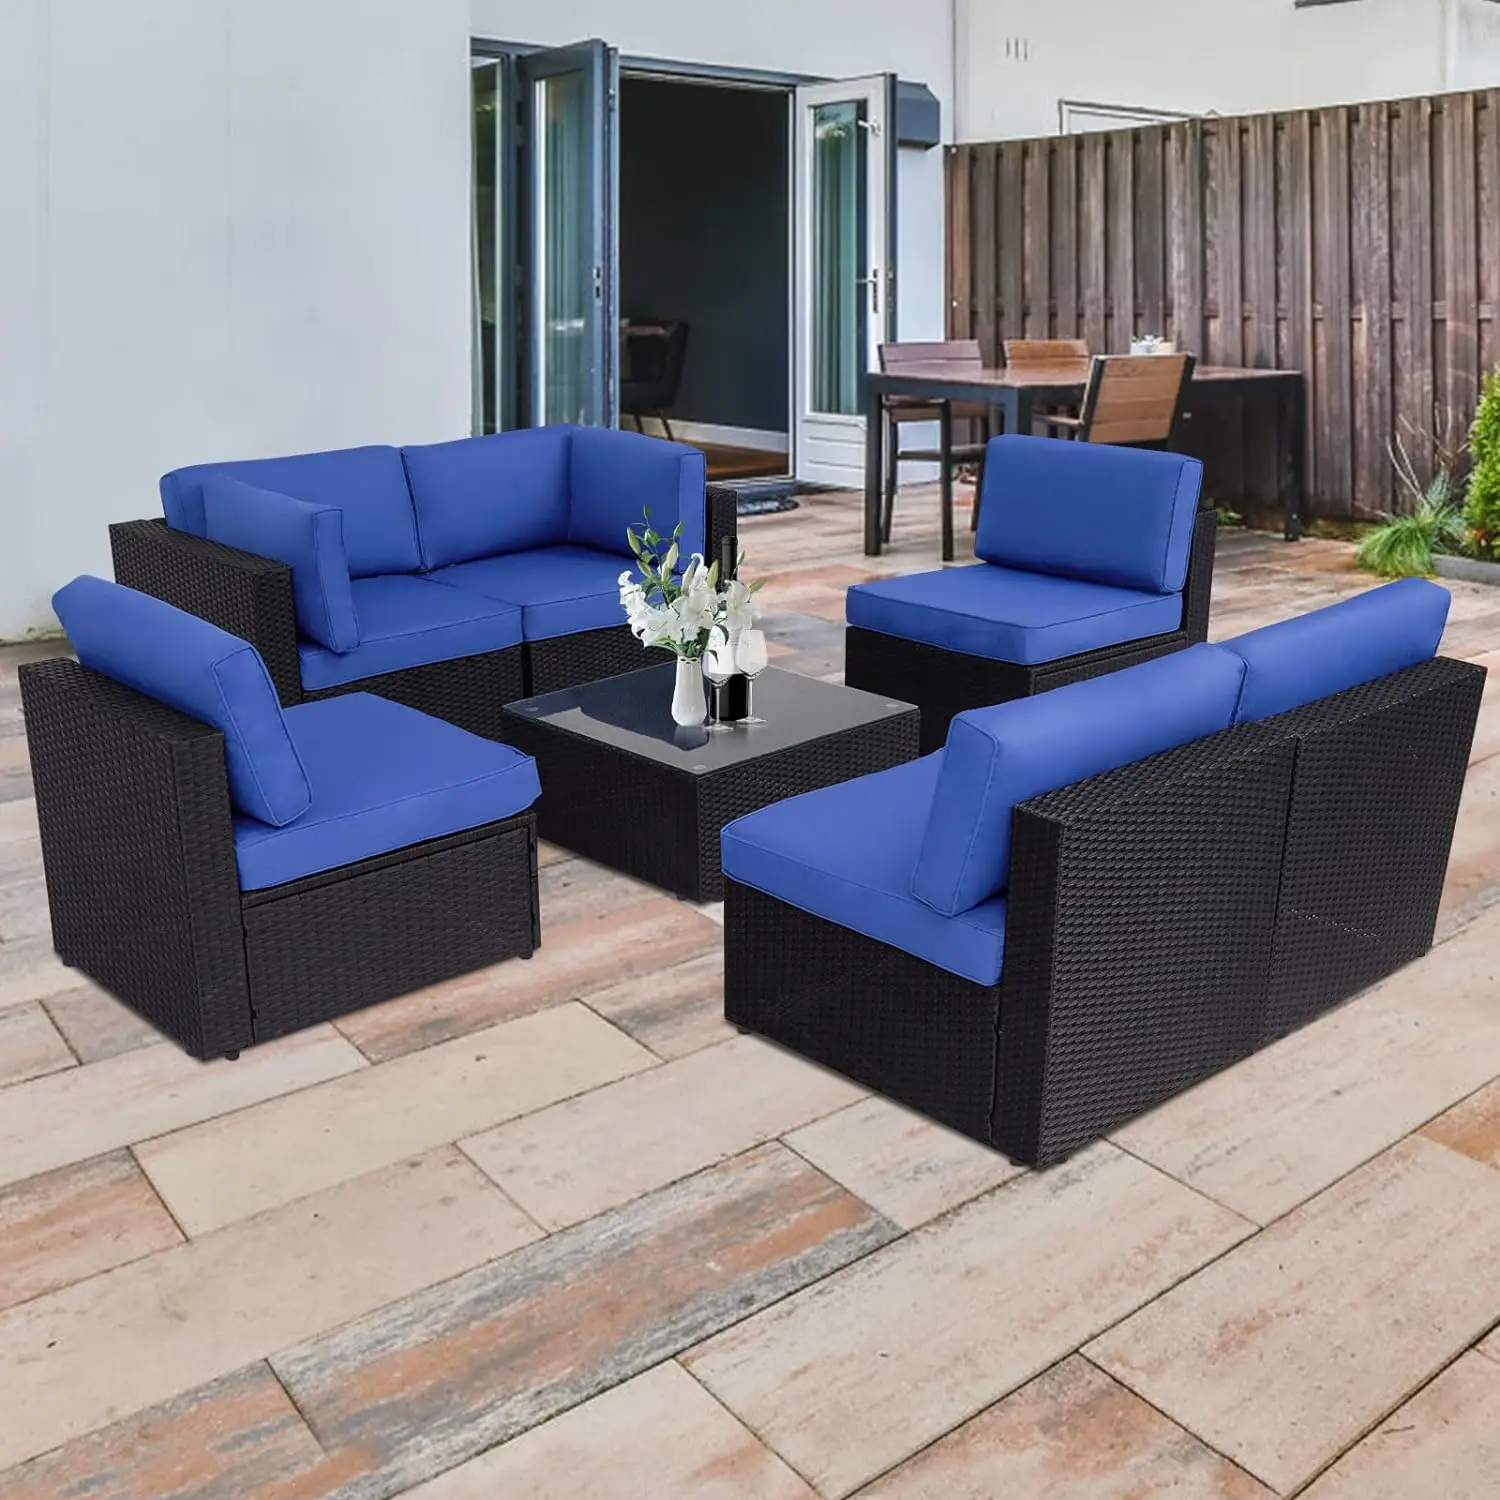 

Outdoor Furniture Sectional Wicker Sofa Set 7 PCs Patio Rattan Clearance with Washable Cushions & Coffee Table, Backyard, Pool